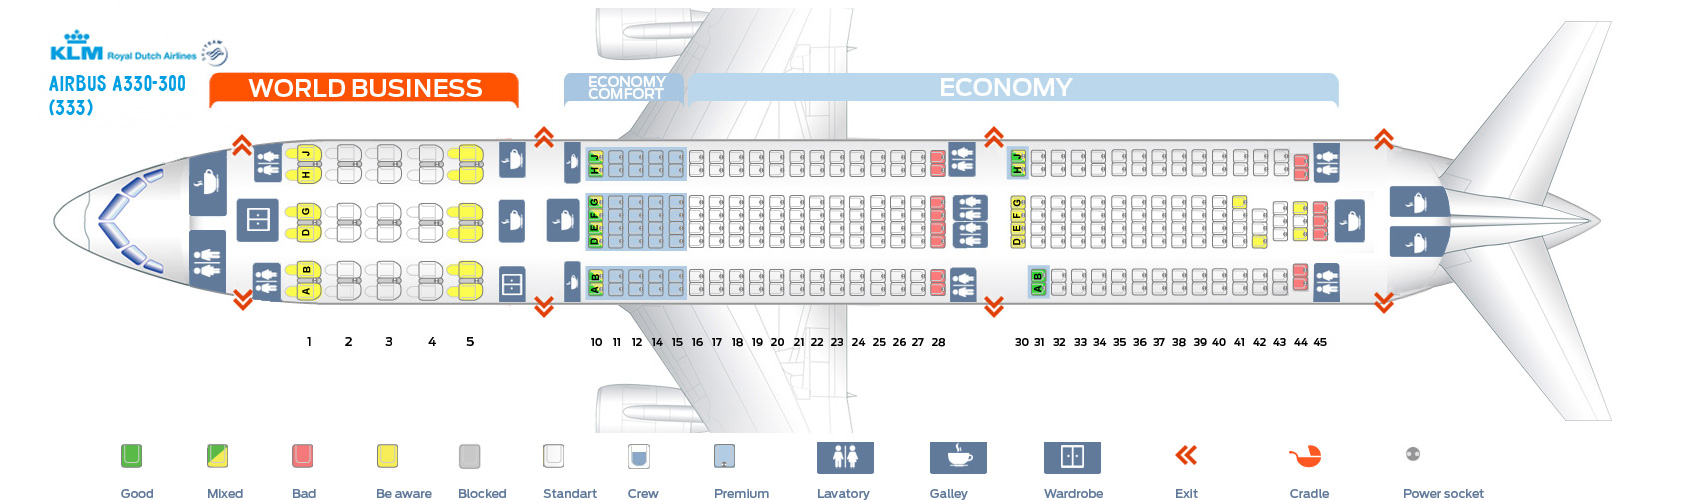 A333 Jet Seating Chart